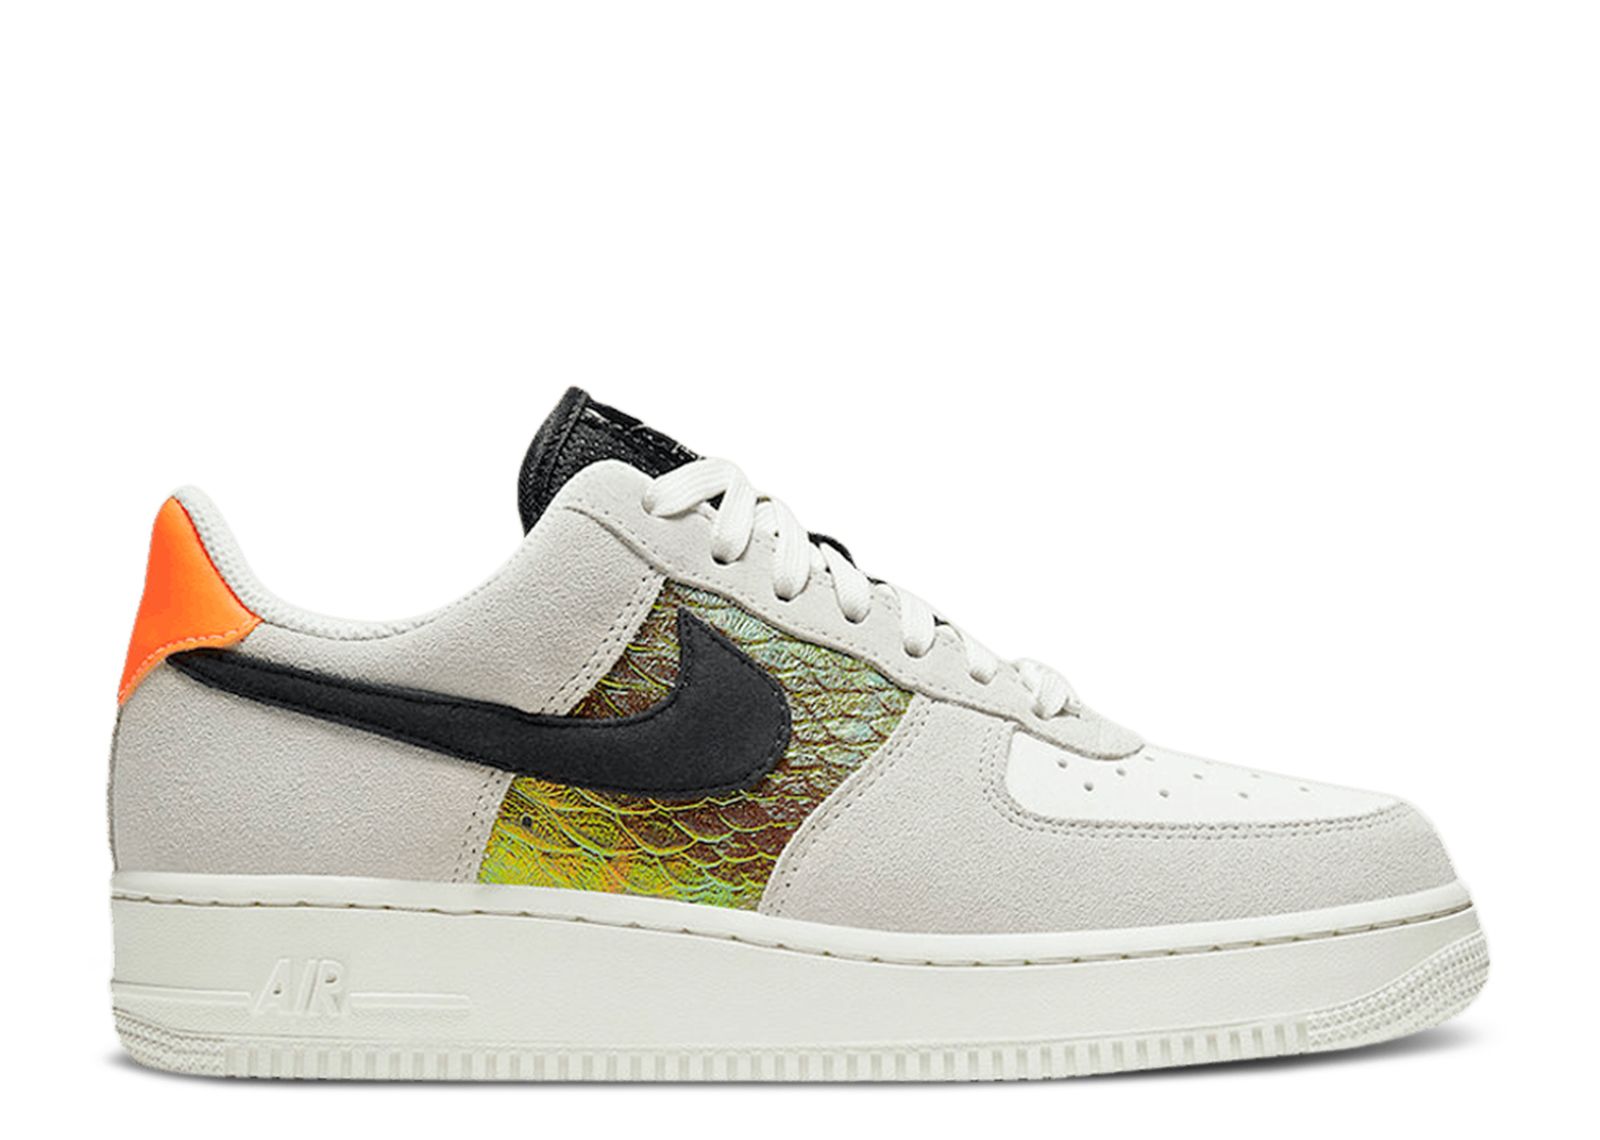 Second Chance - Multi Nike Air Force 1 Low Iridescent Snakeskin - 36 | NEW